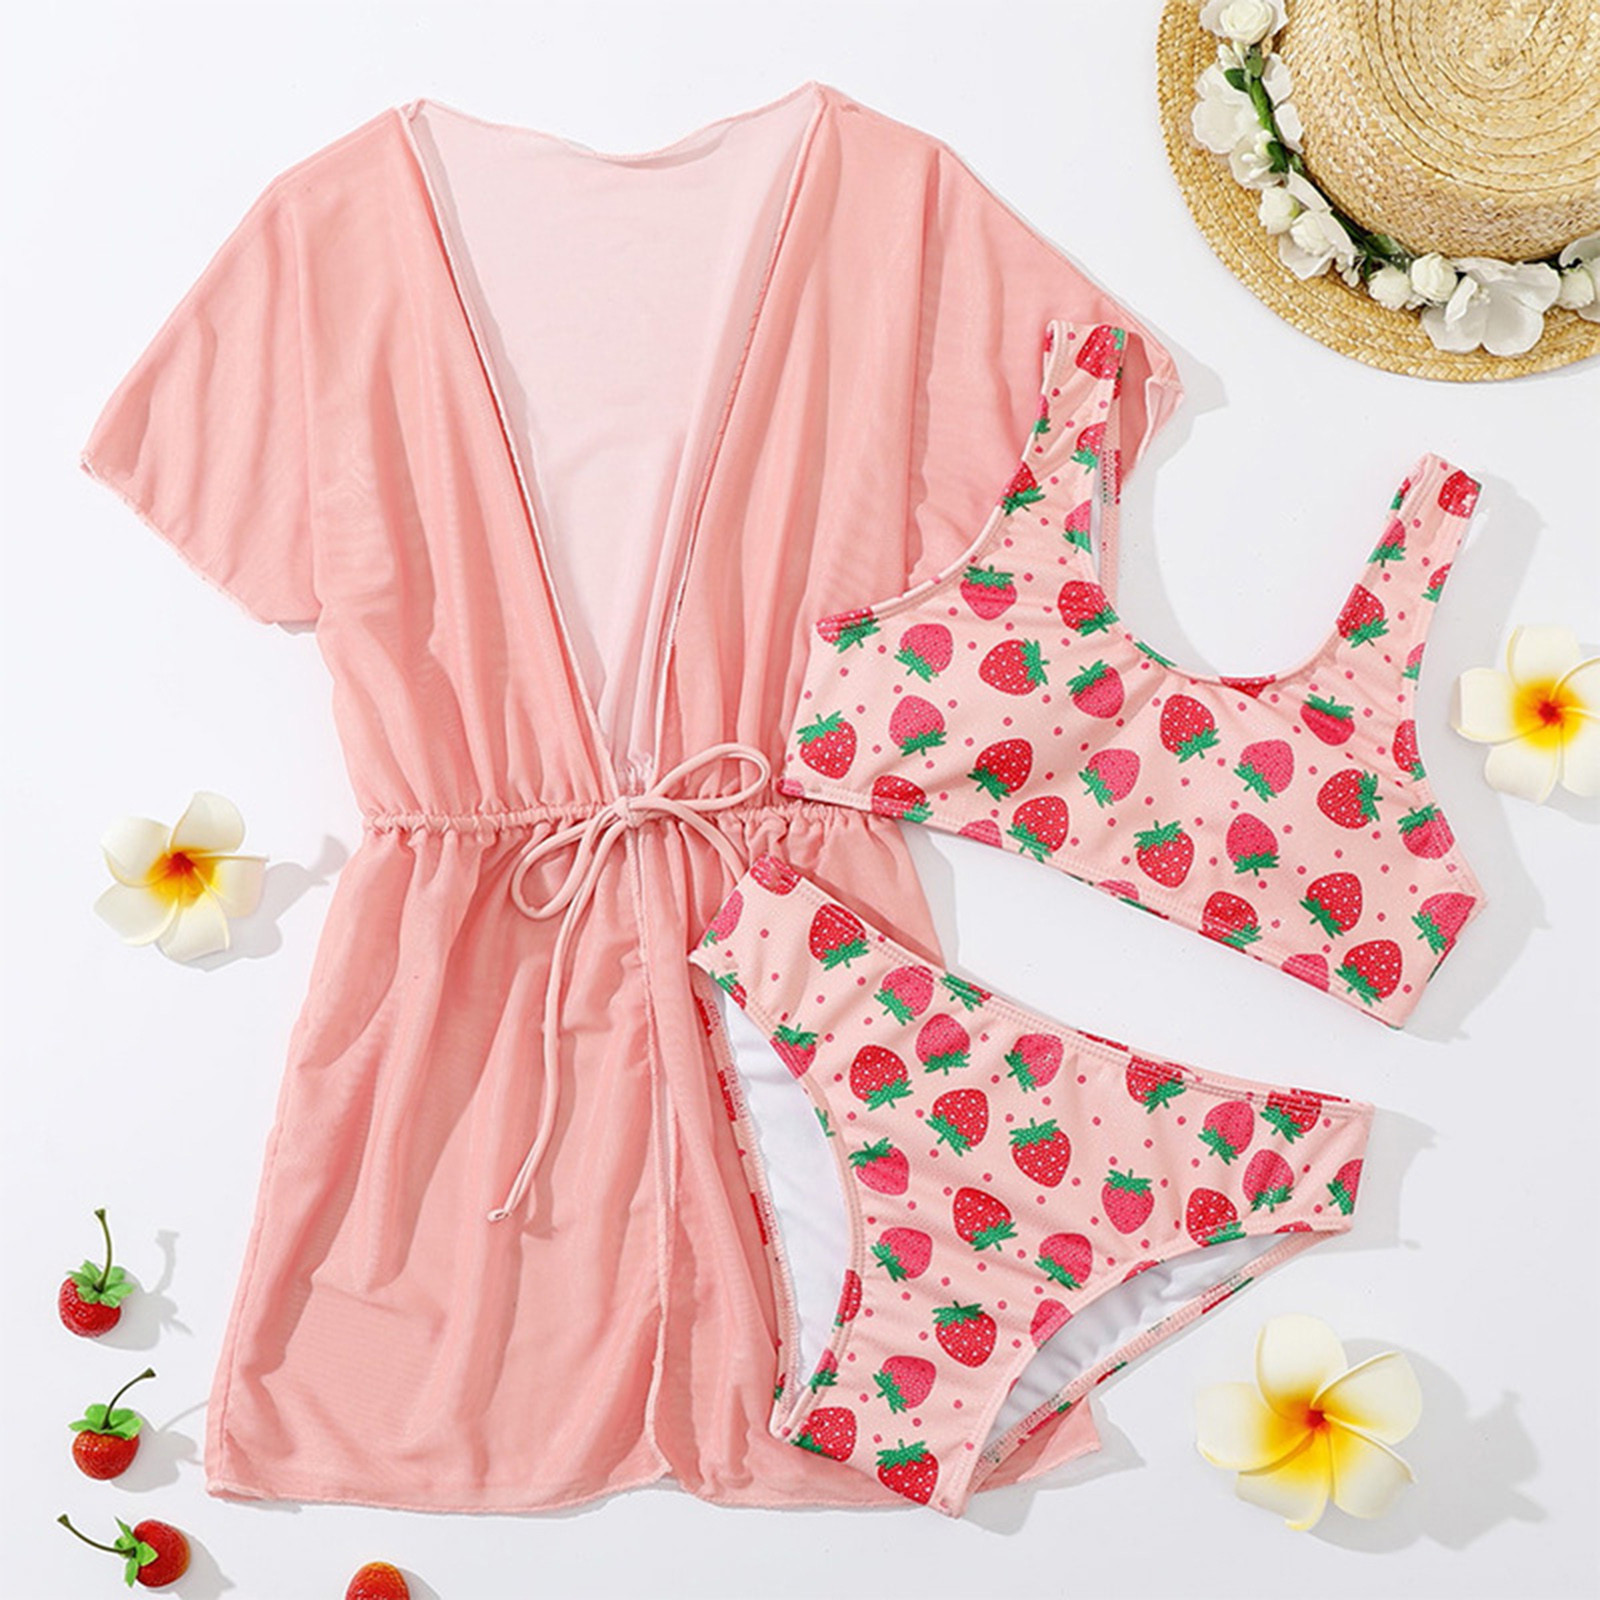 Baby Girls 3 Piece Strawberry Print S Cute Bikini Suit With Cover Up ...